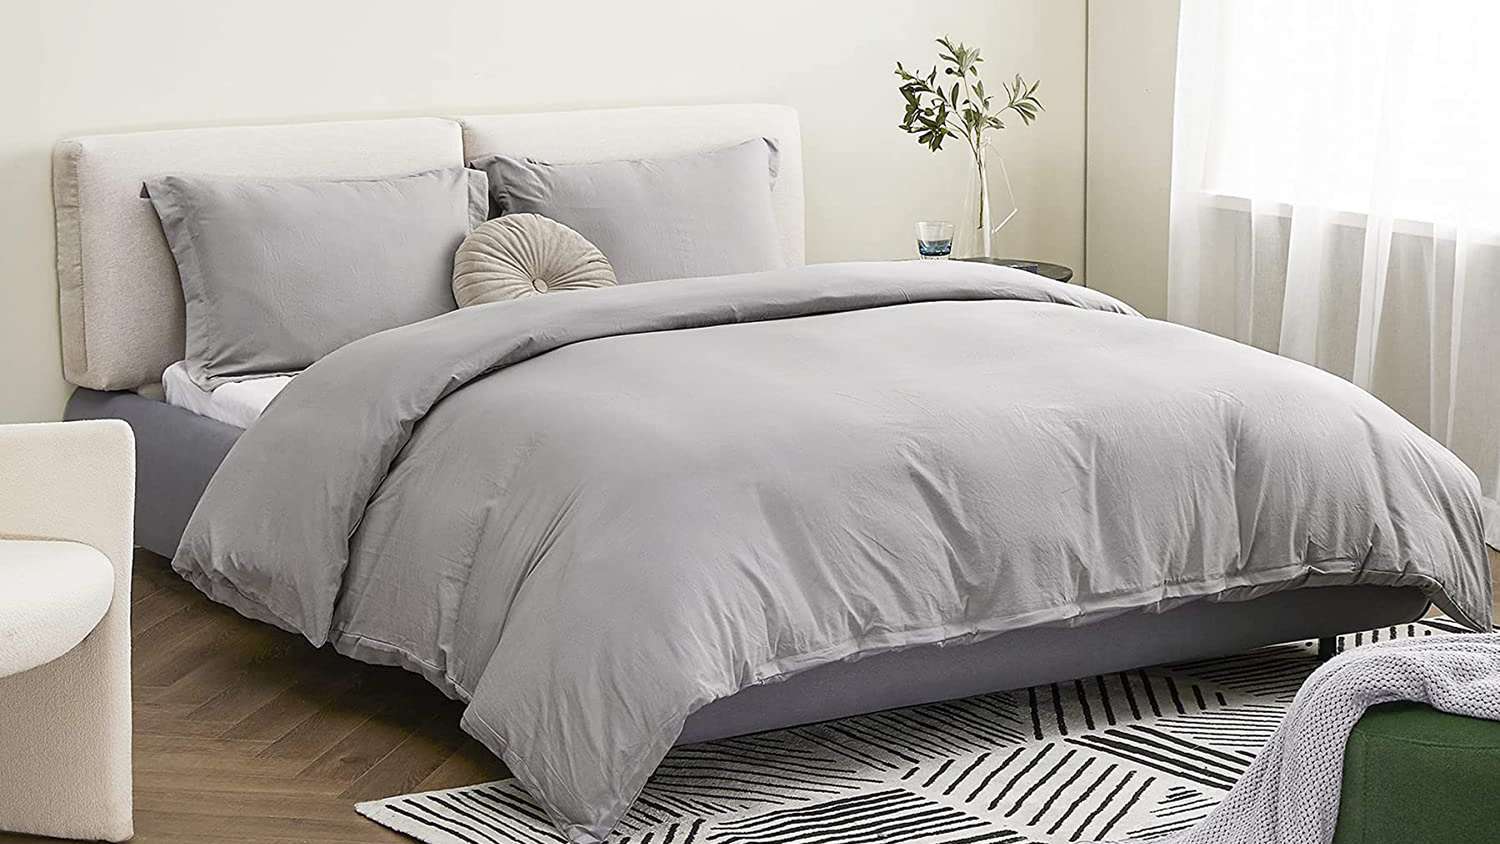 The 16 Best Duvet Covers You Can, Easy Way To Put On King Size Duvet Cover Dimensions